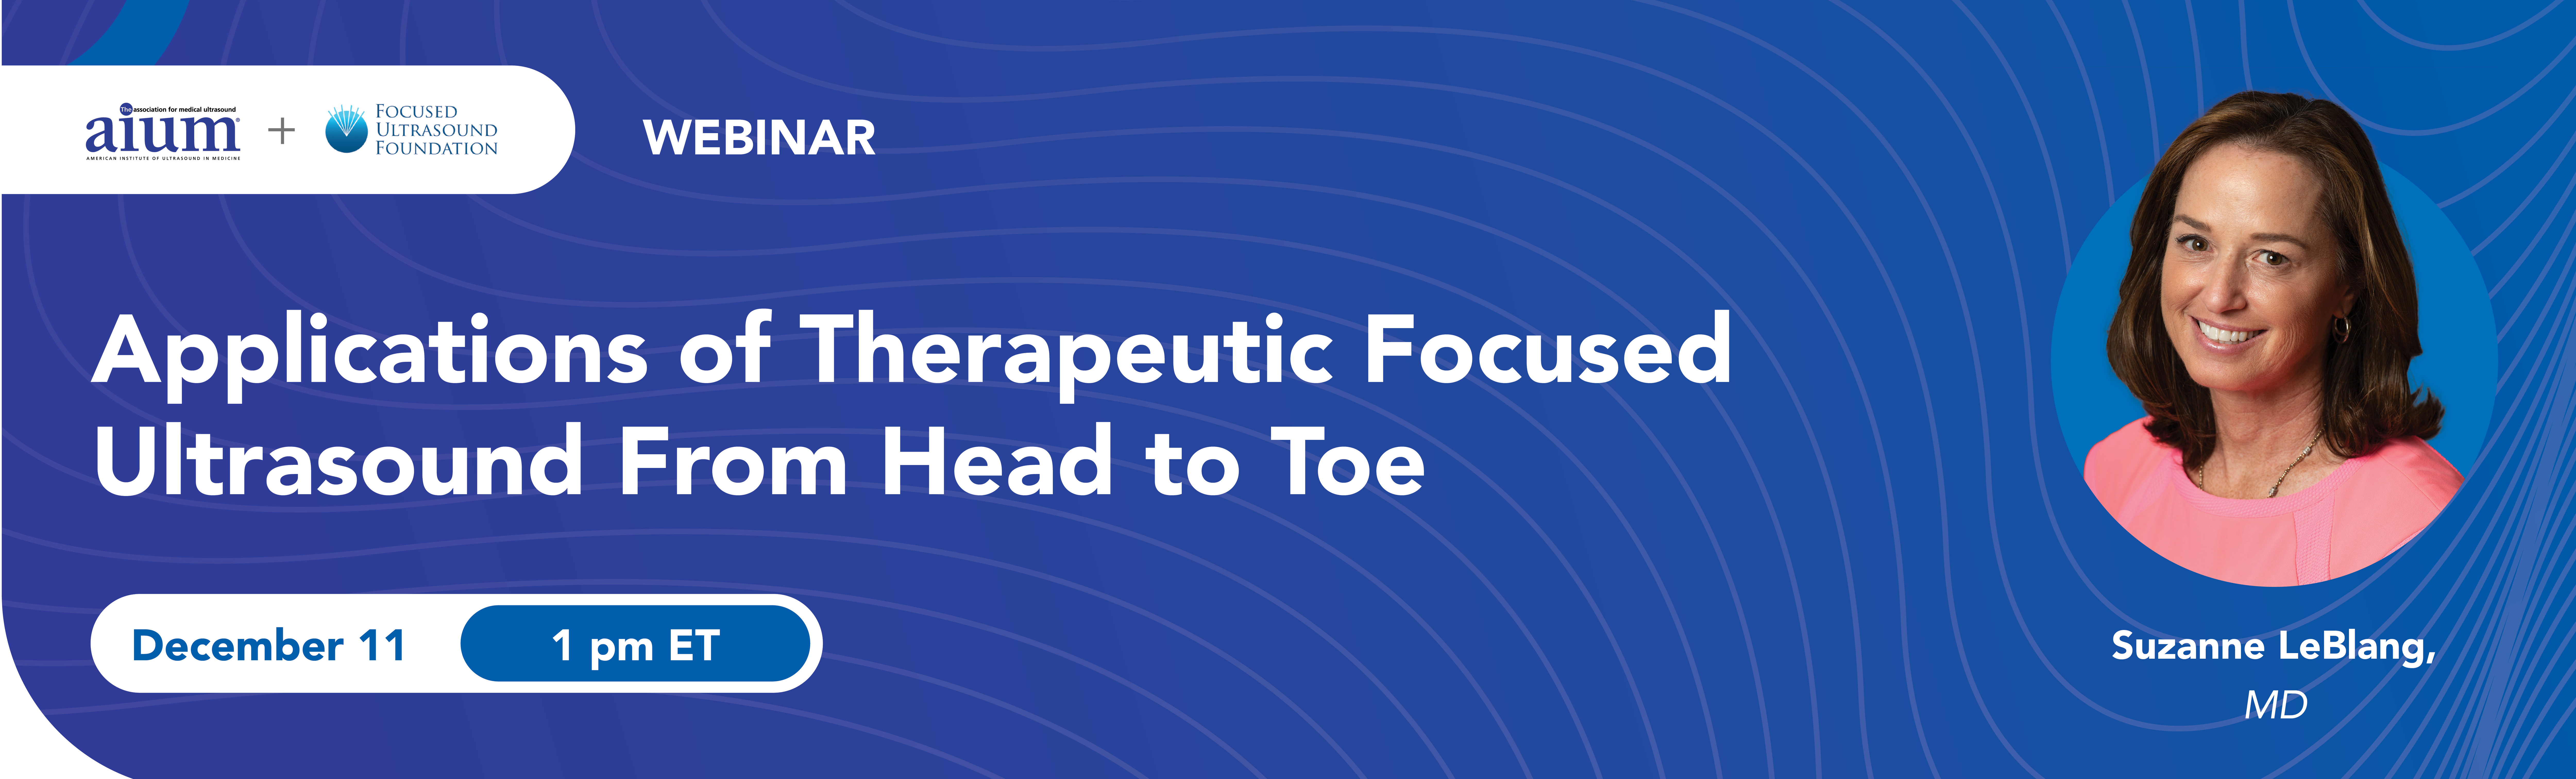 Applications of Therapeutic Focused Ultrasound From Head to Toe